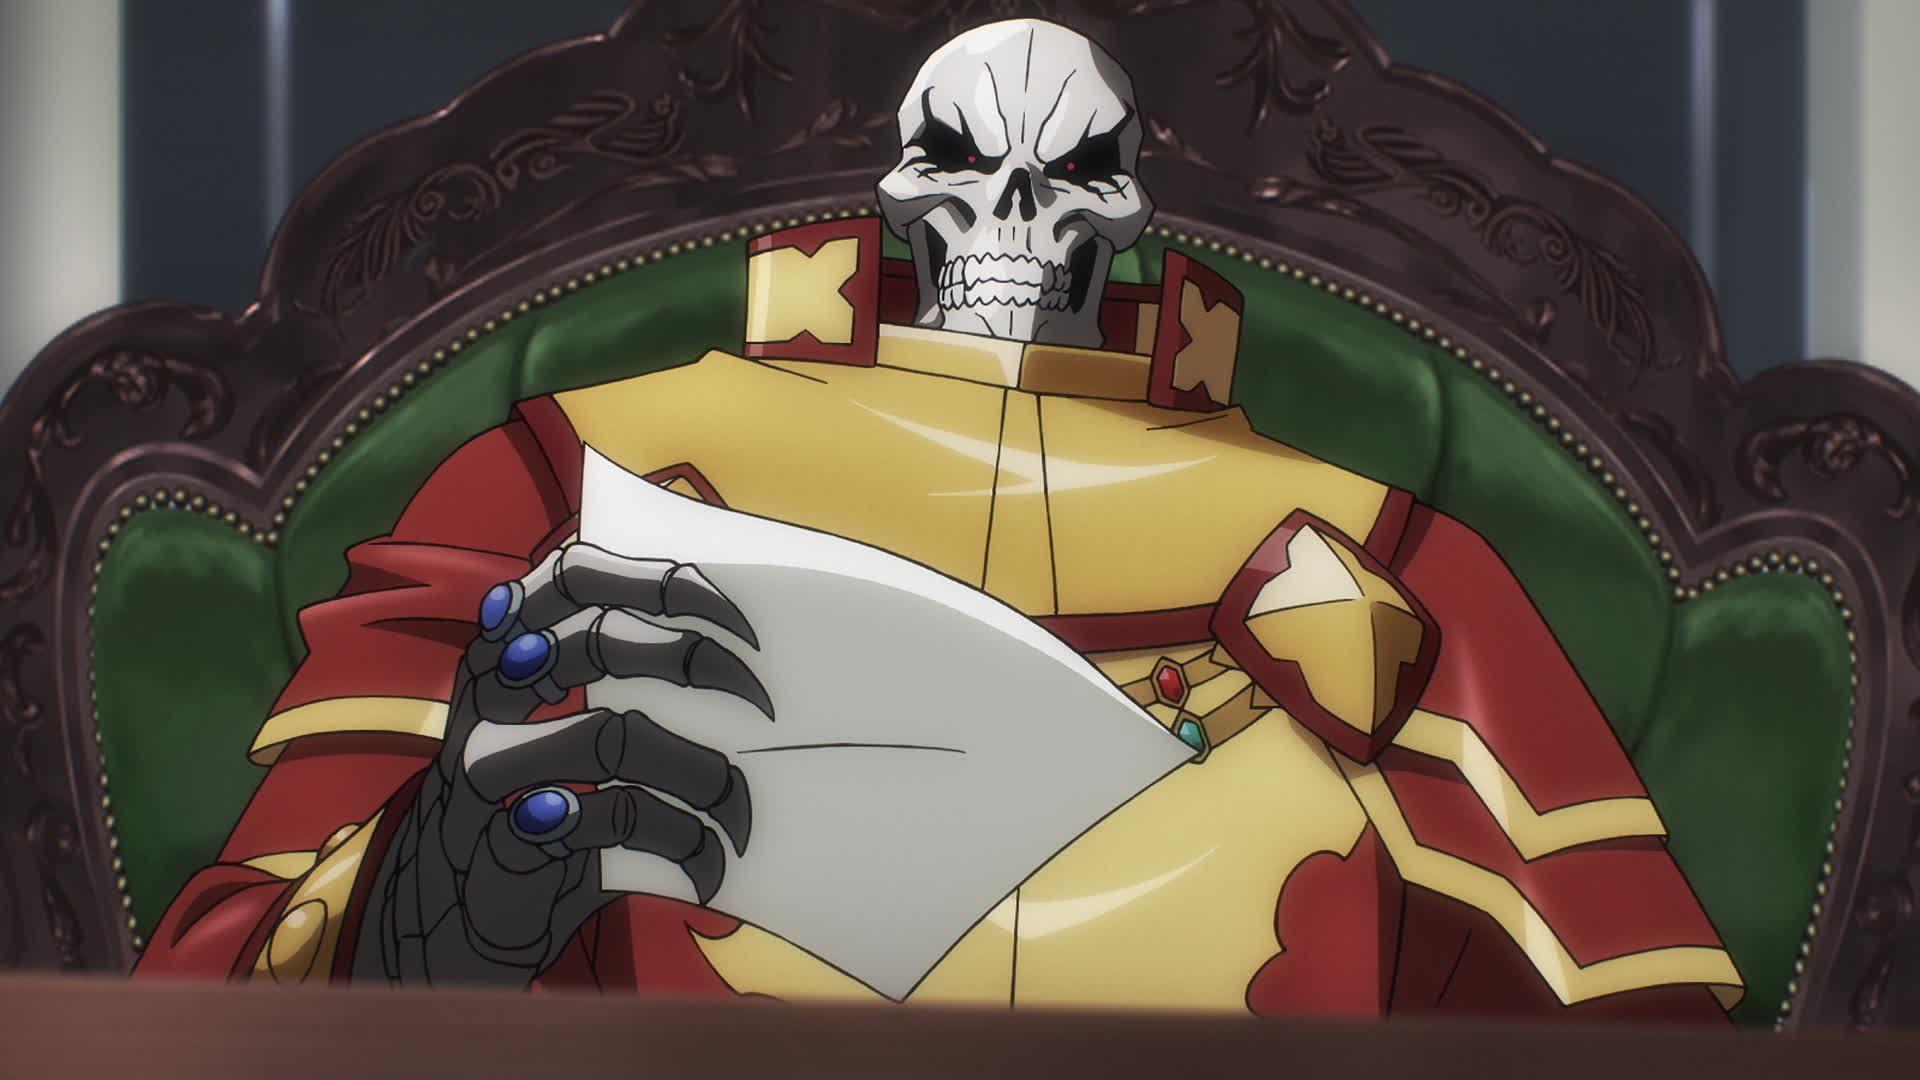 Who Betrays Ainz in Overlord? Theories Explored